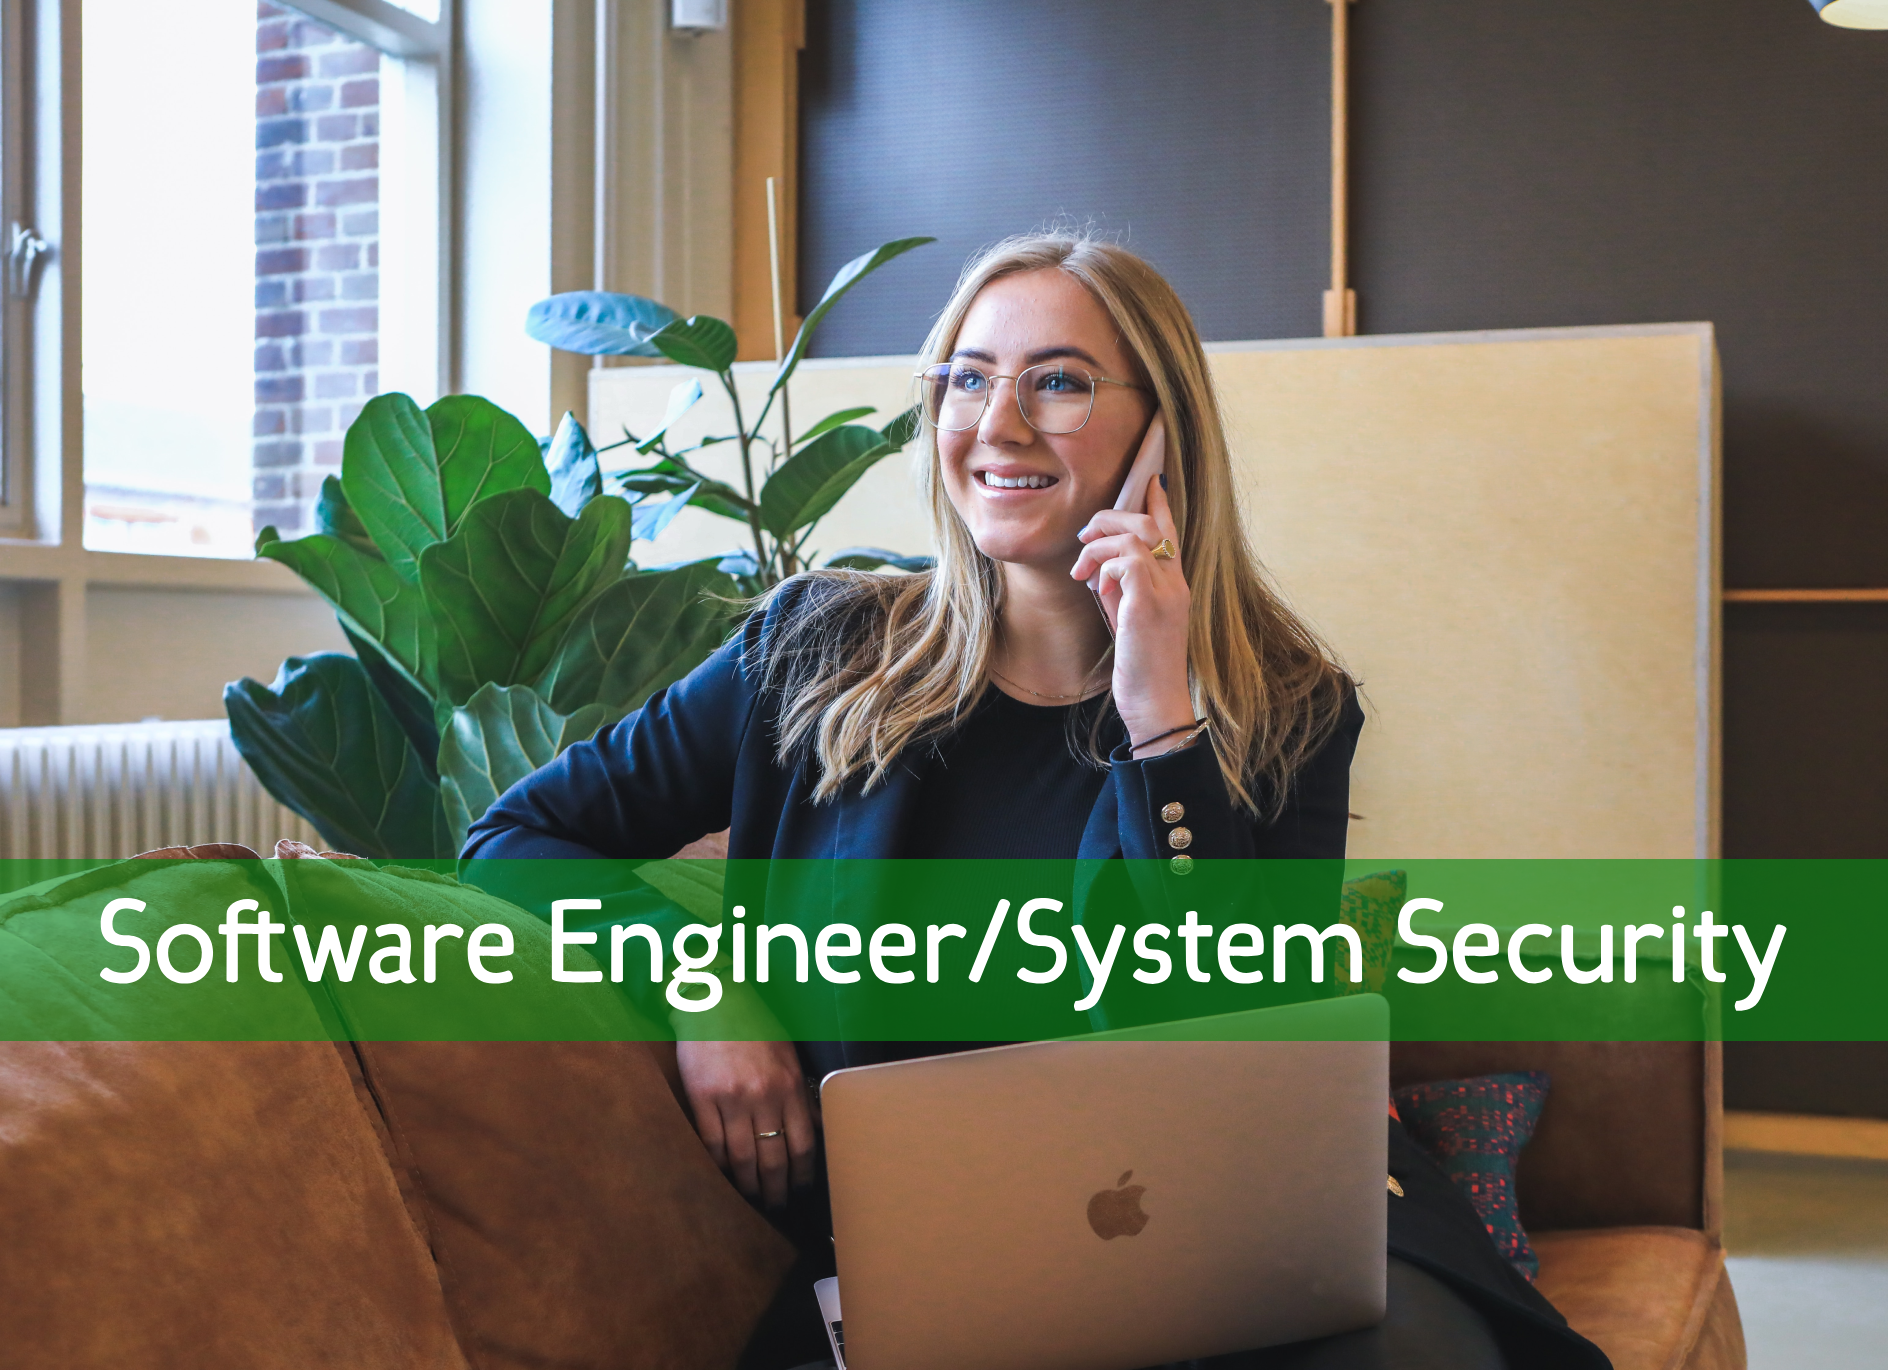 Secure Your Career: Software Engineer/System Security Opportunity at Sayas Group of Companies